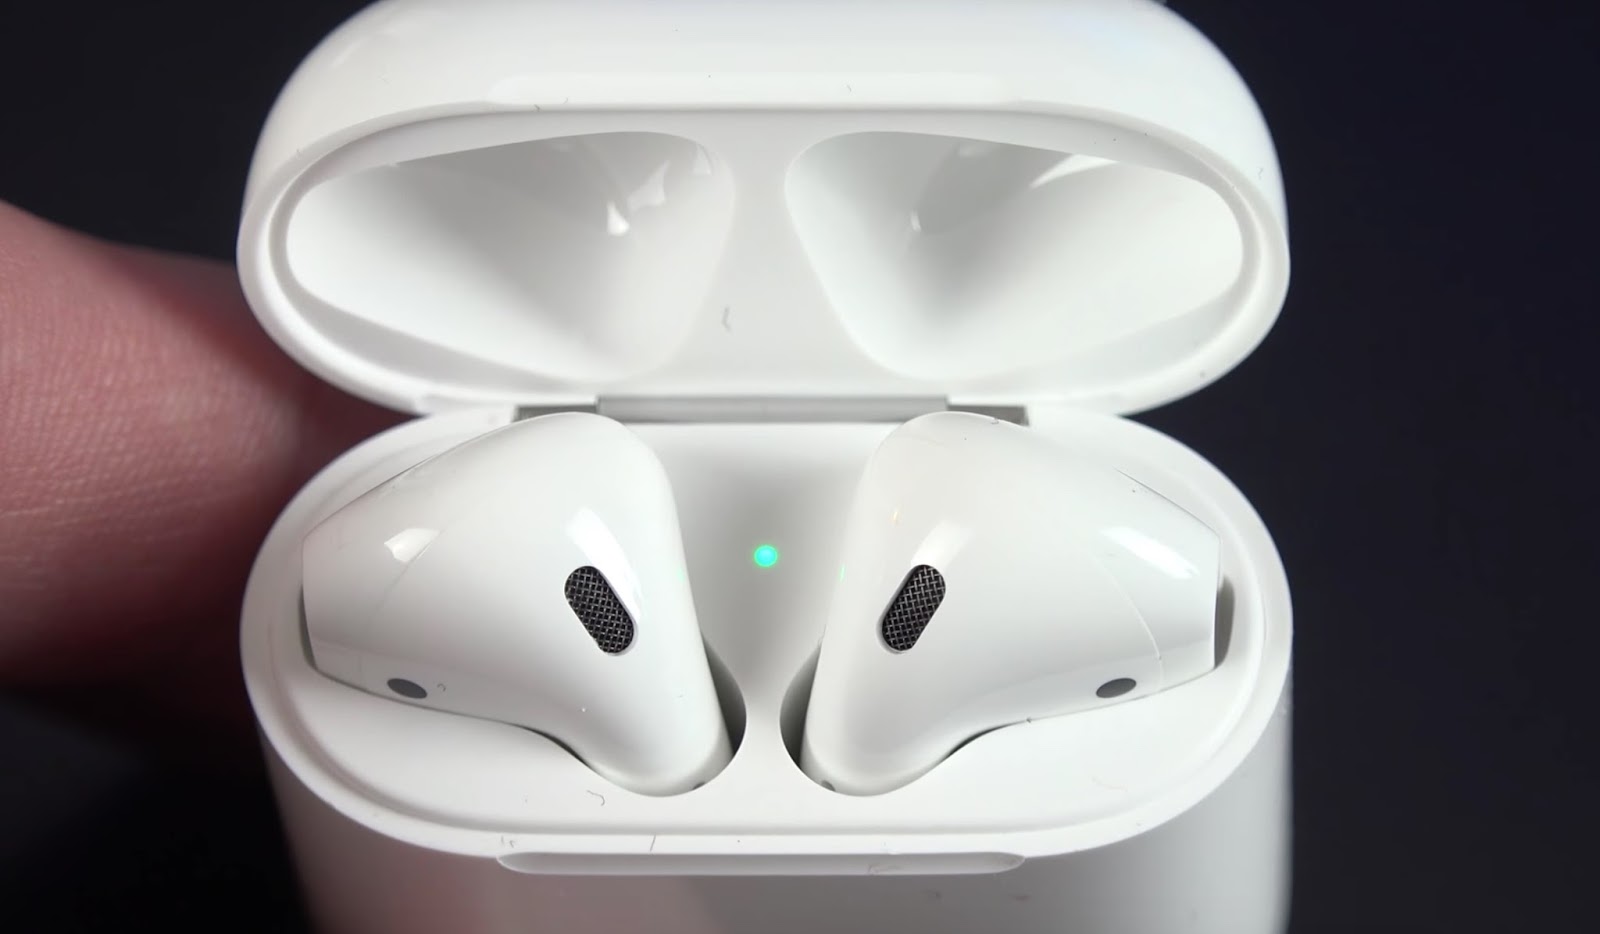 After a Year of using AirPods's Impression. 